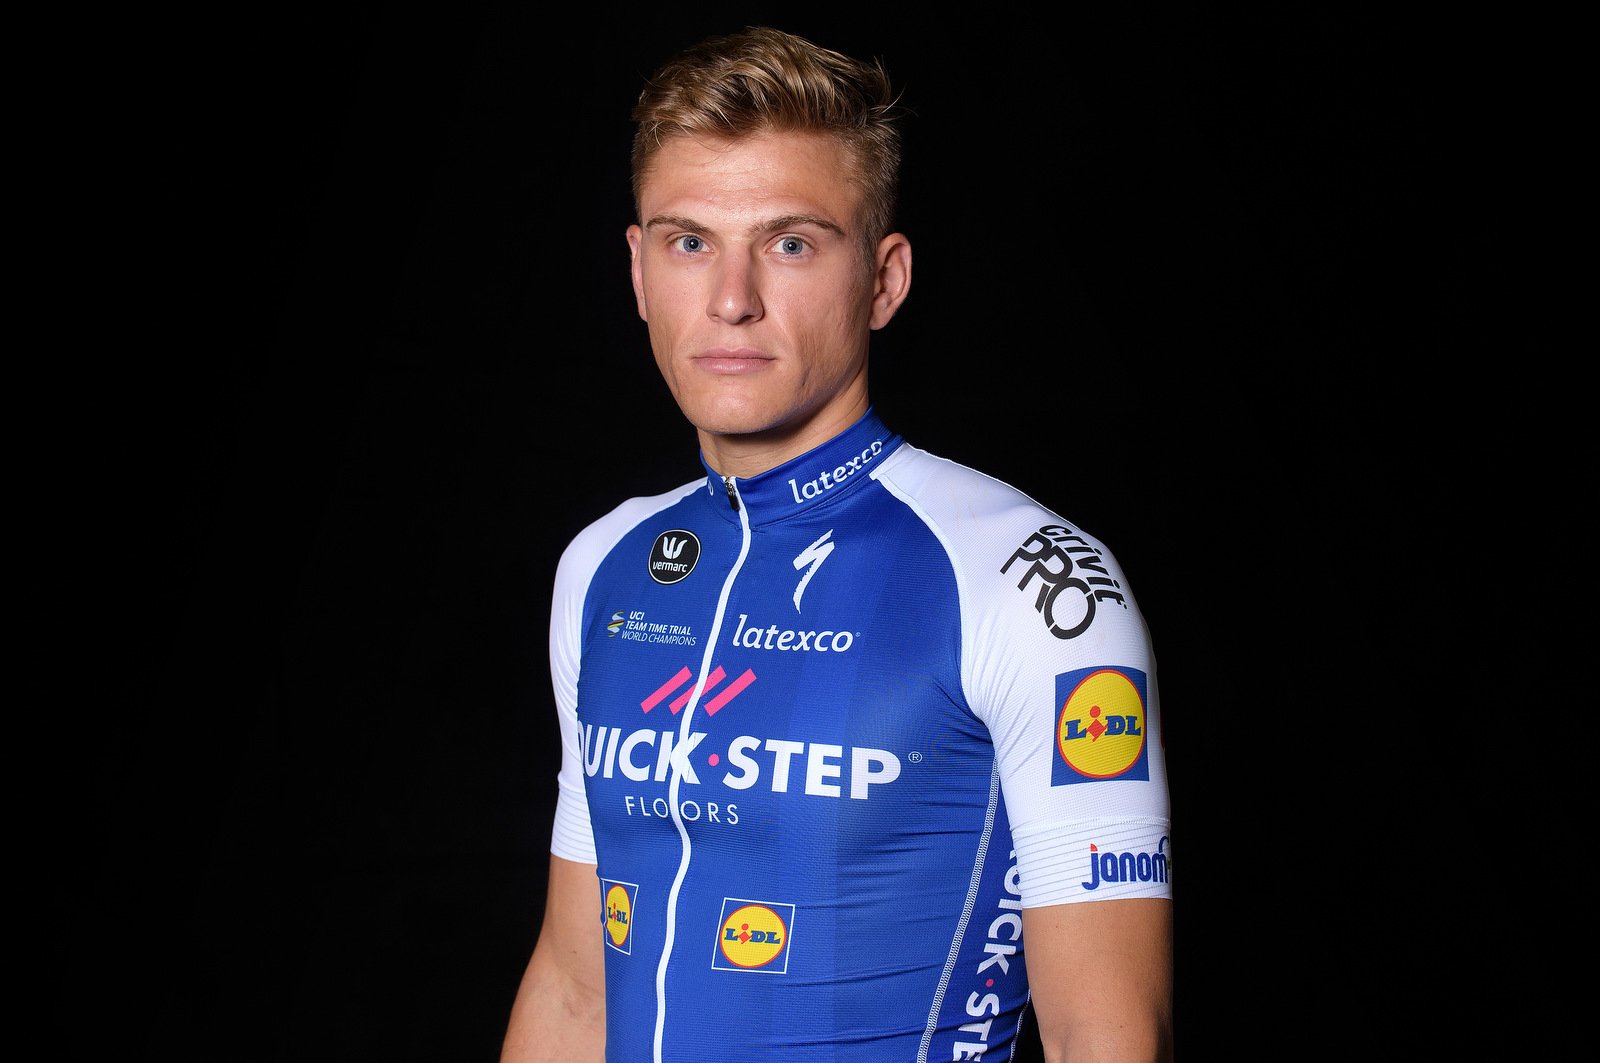 on Twitter: "We are happy to give you our beautiful 2017 kit: https://t.co/tvD2ht8v0v #WayToRide Photo: @TDWsport https://t.co/7iuFxZ7q5l" / Twitter